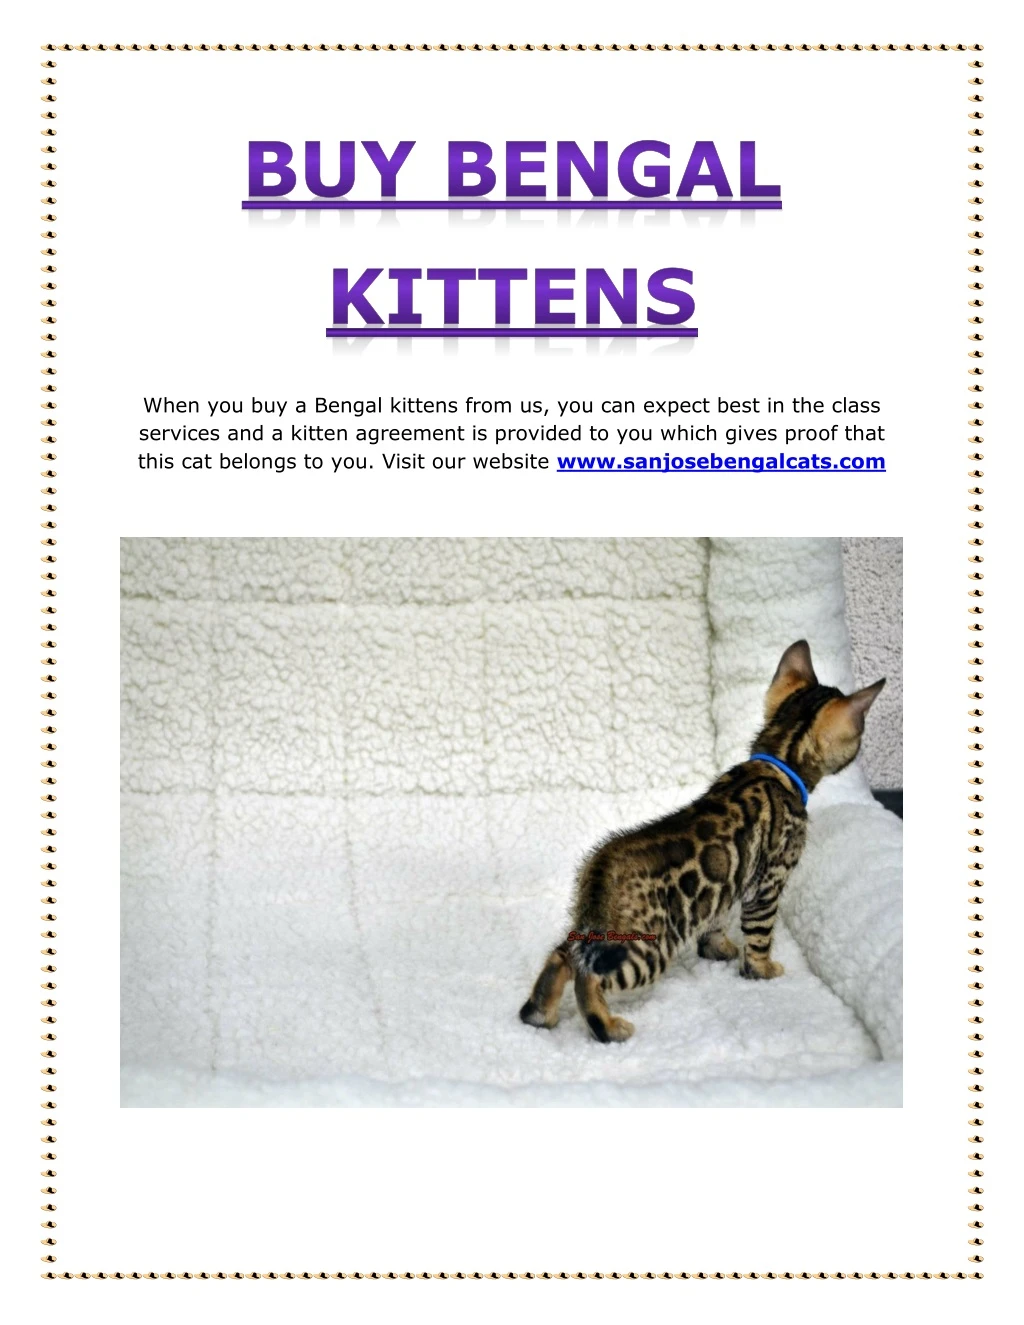 when you buy a bengal kittens from